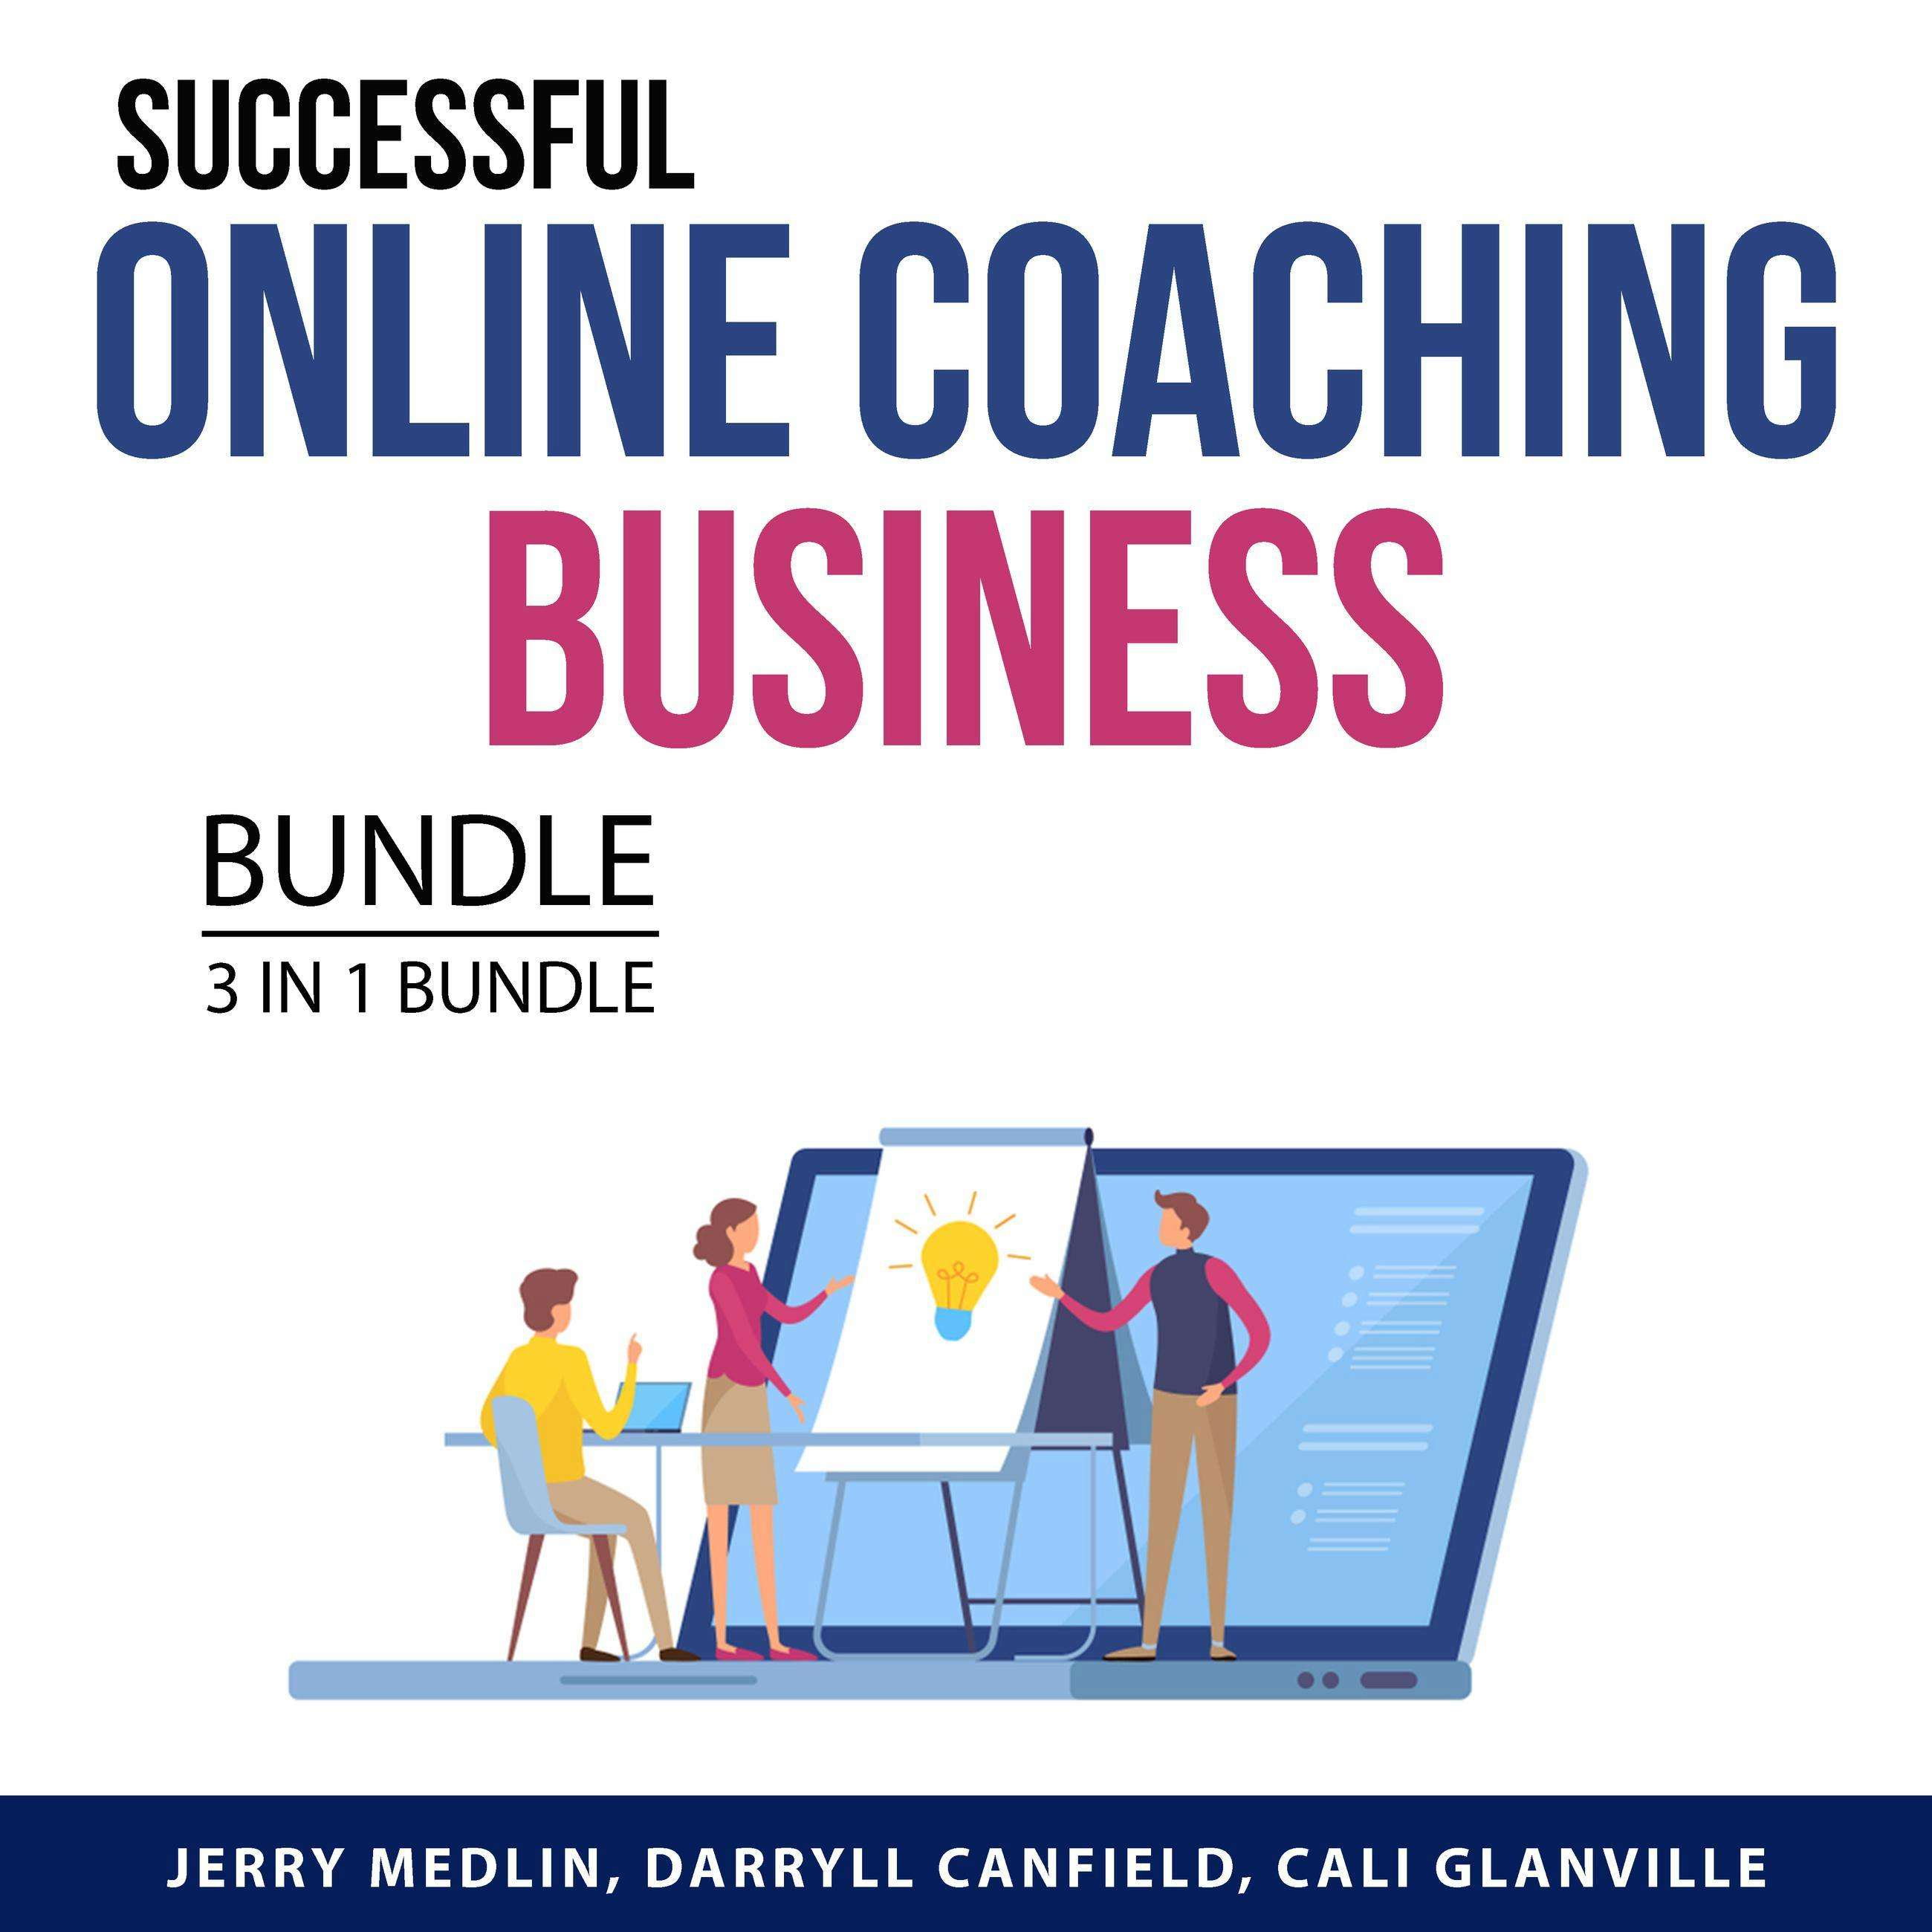 Successful Online Coaching Business Bundle, 3 in 1 Bundle: Online Coaching Business Plan, Online Coaching Business, and Coaching Business Bible - undefined